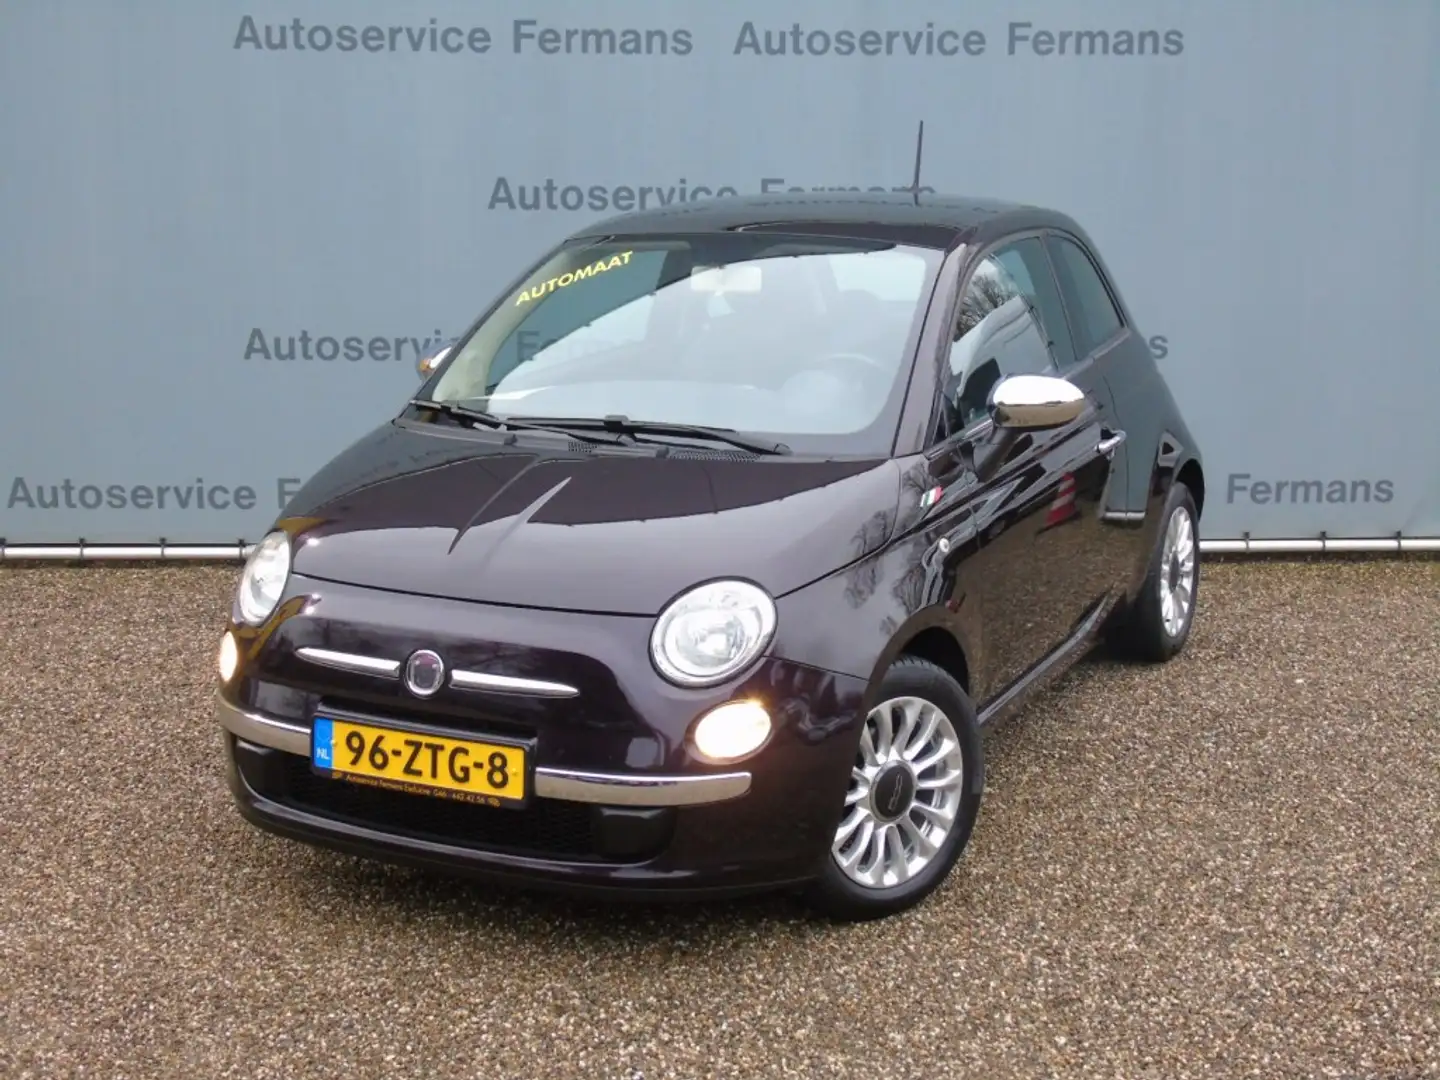 Fiat 500 500 twin air Lounge Automaat - 2013 - 78DM - Airco Paars - 2